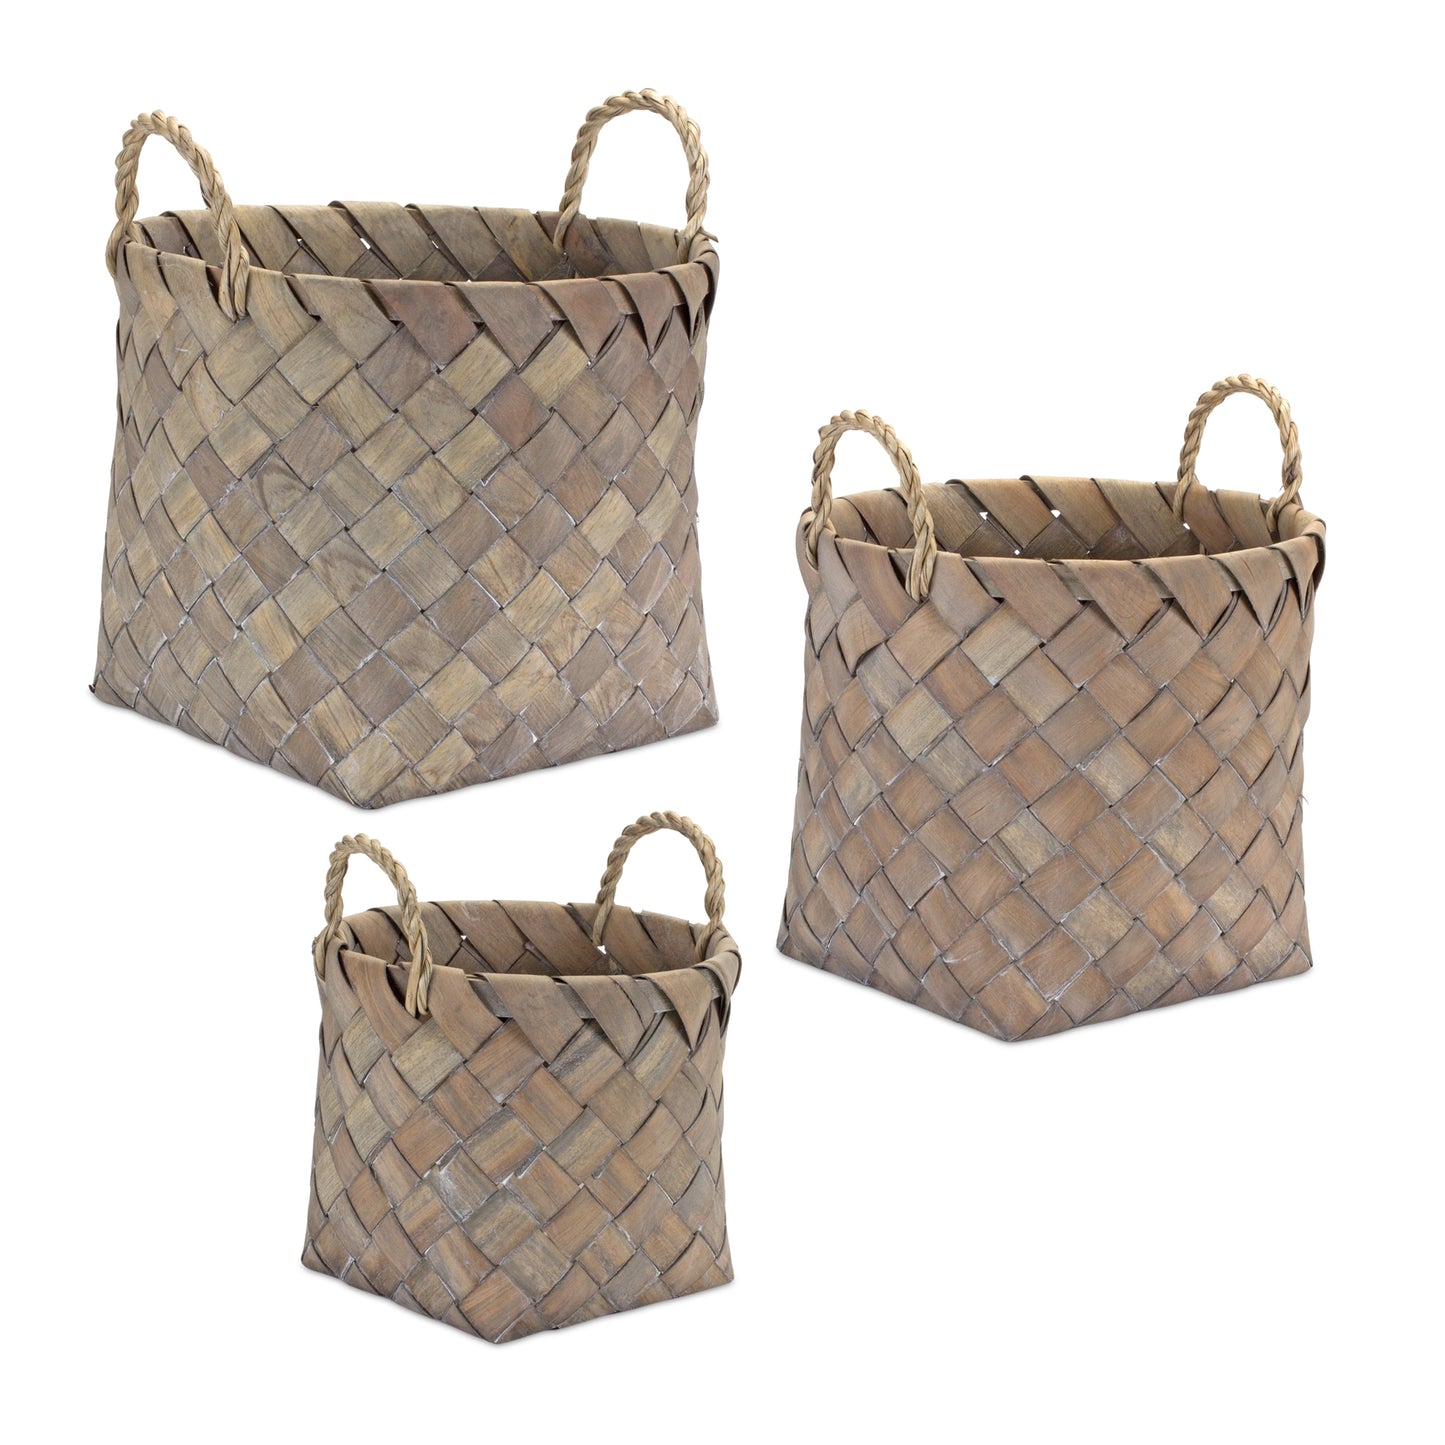 Natural Woven Wicker Basket with Handles (Set of 3)